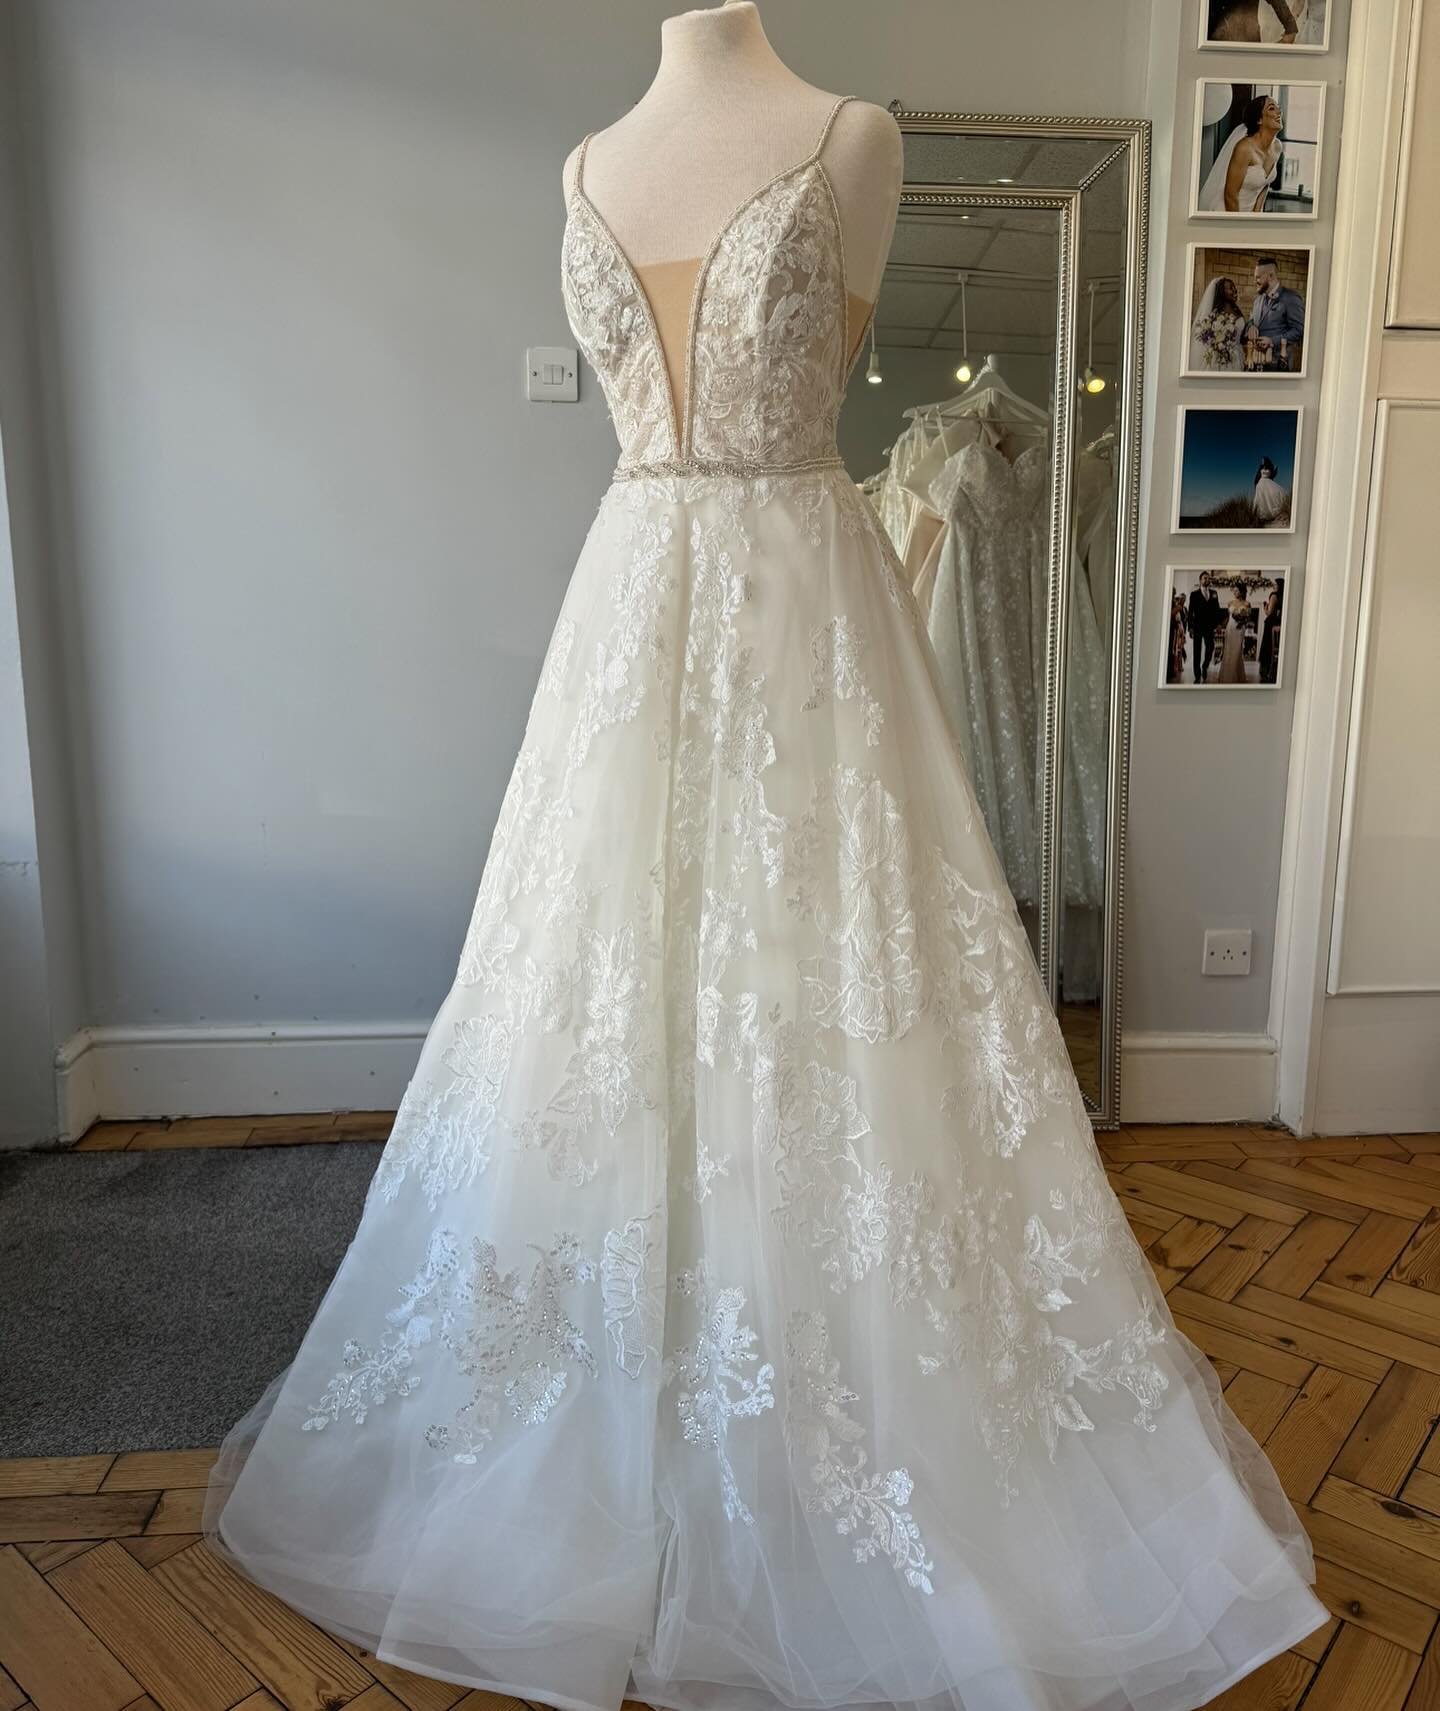 This beauty is an aline style with deep plunge neckline, delicate straps and belt at the waist. She has softly embroidered lace, a crinoline hem and an open back!

Designer - Martin Thornburg 

Size - 12